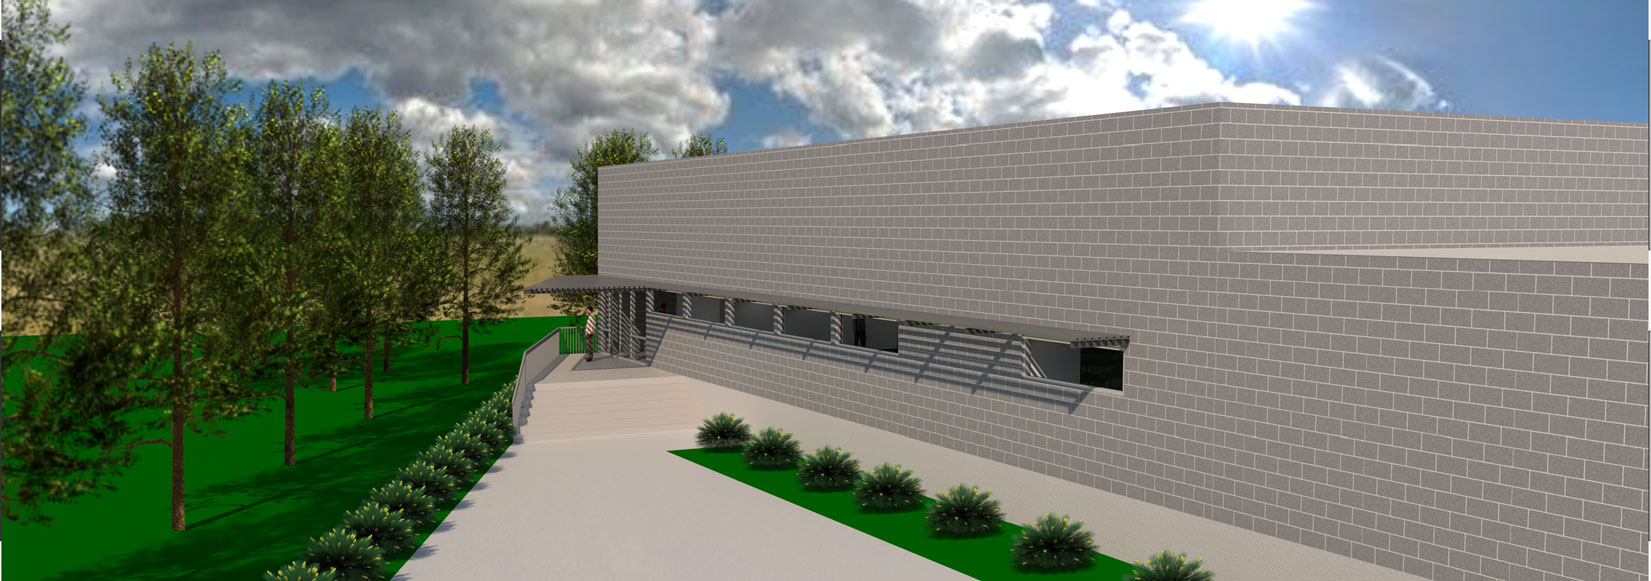 A rendering of the exterior of a building.